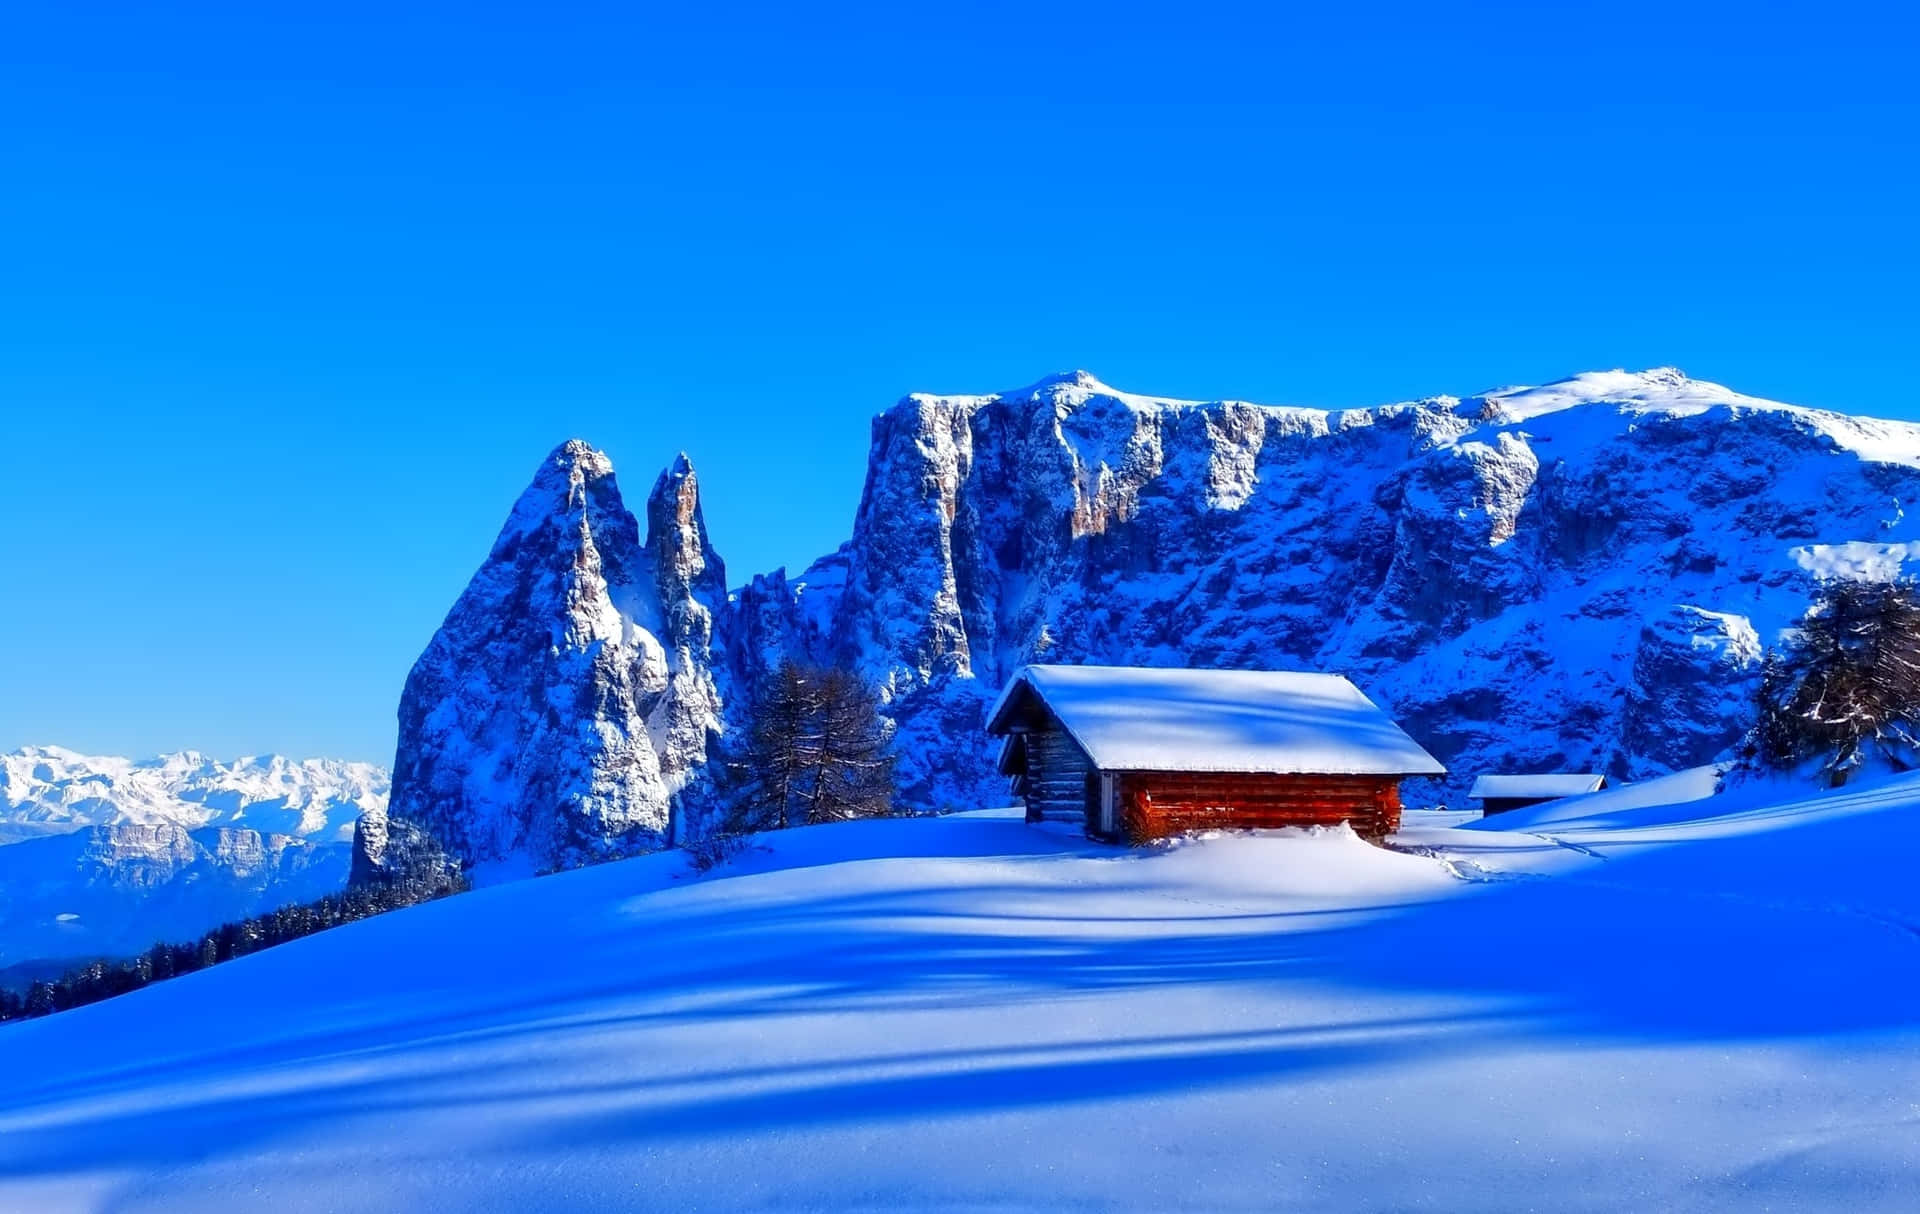 Find Solace in a Cozy Hut